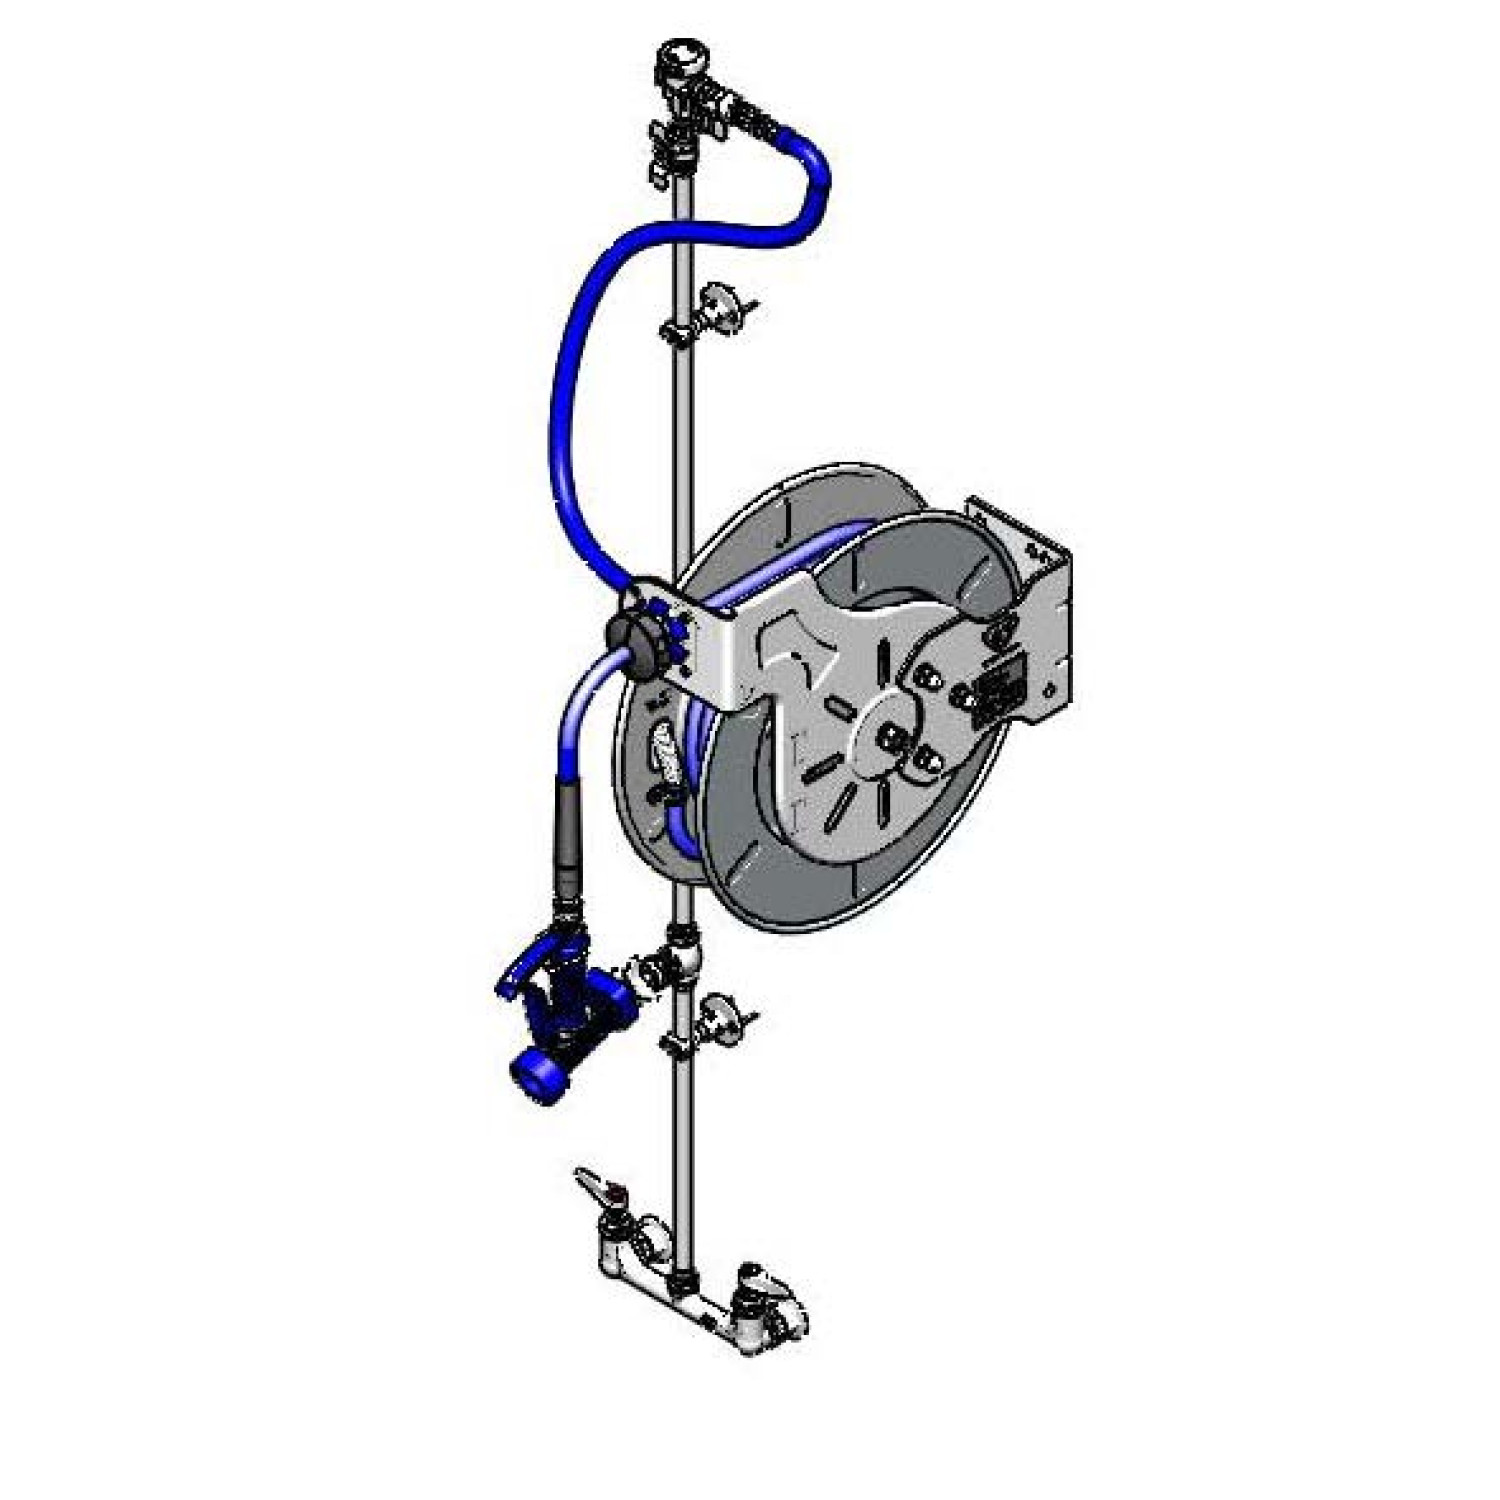 T&S Brass B-7142-C01 Hose Reel System, enclosed, stainless steel, 3/8 x 50  ft. hose, with spray valve